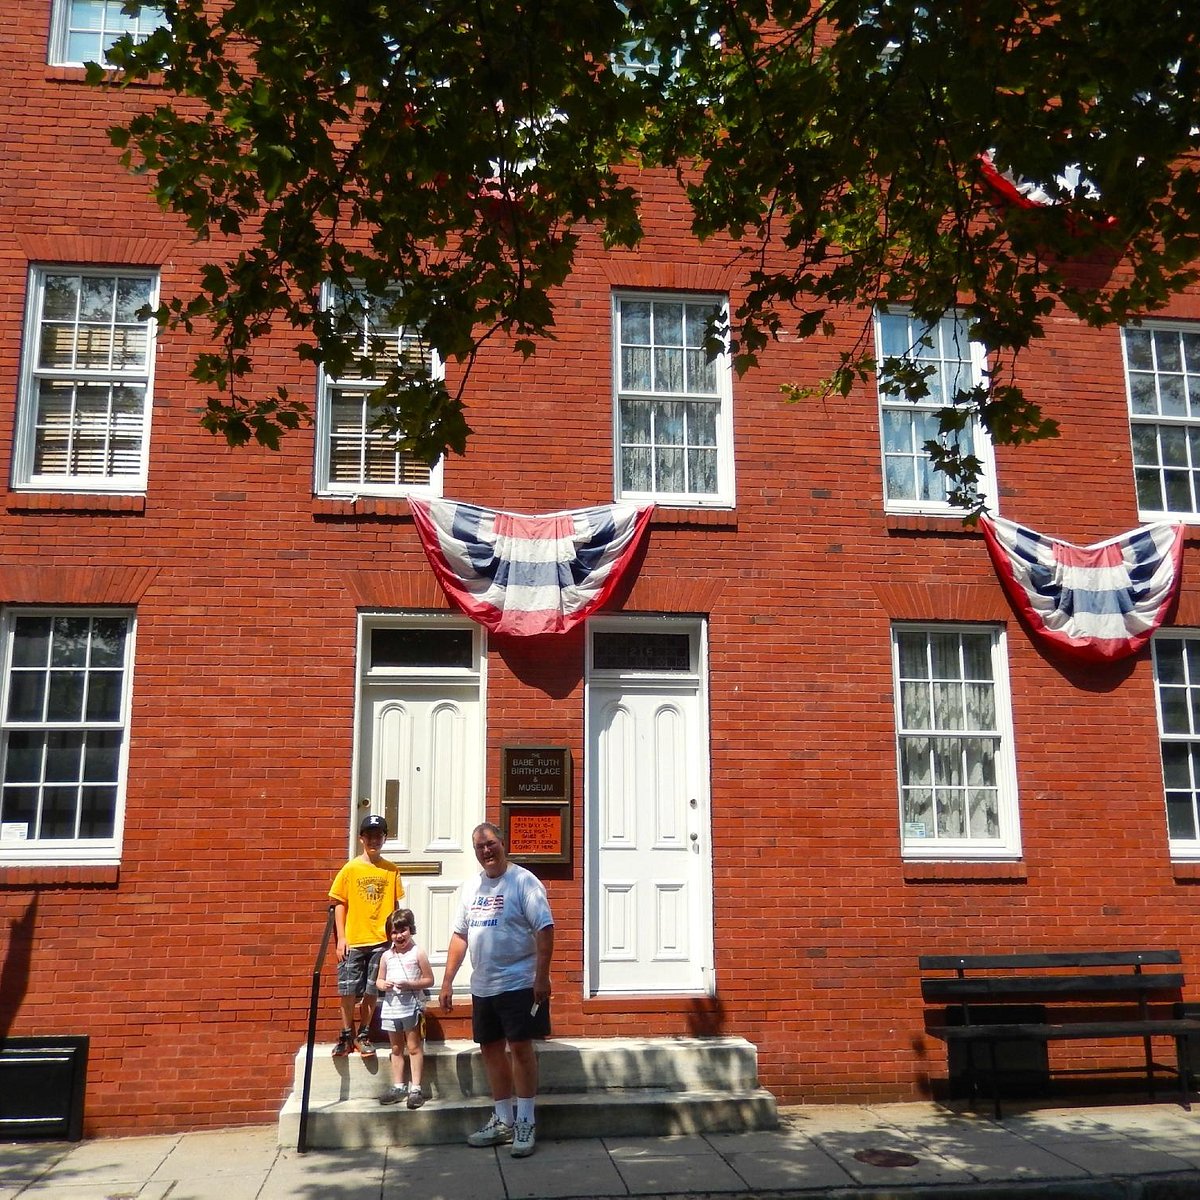 WORLD OF LITTLE LEAGUE® MUSEUM HOUSES THE MOST COMPLETE BABE RUTH